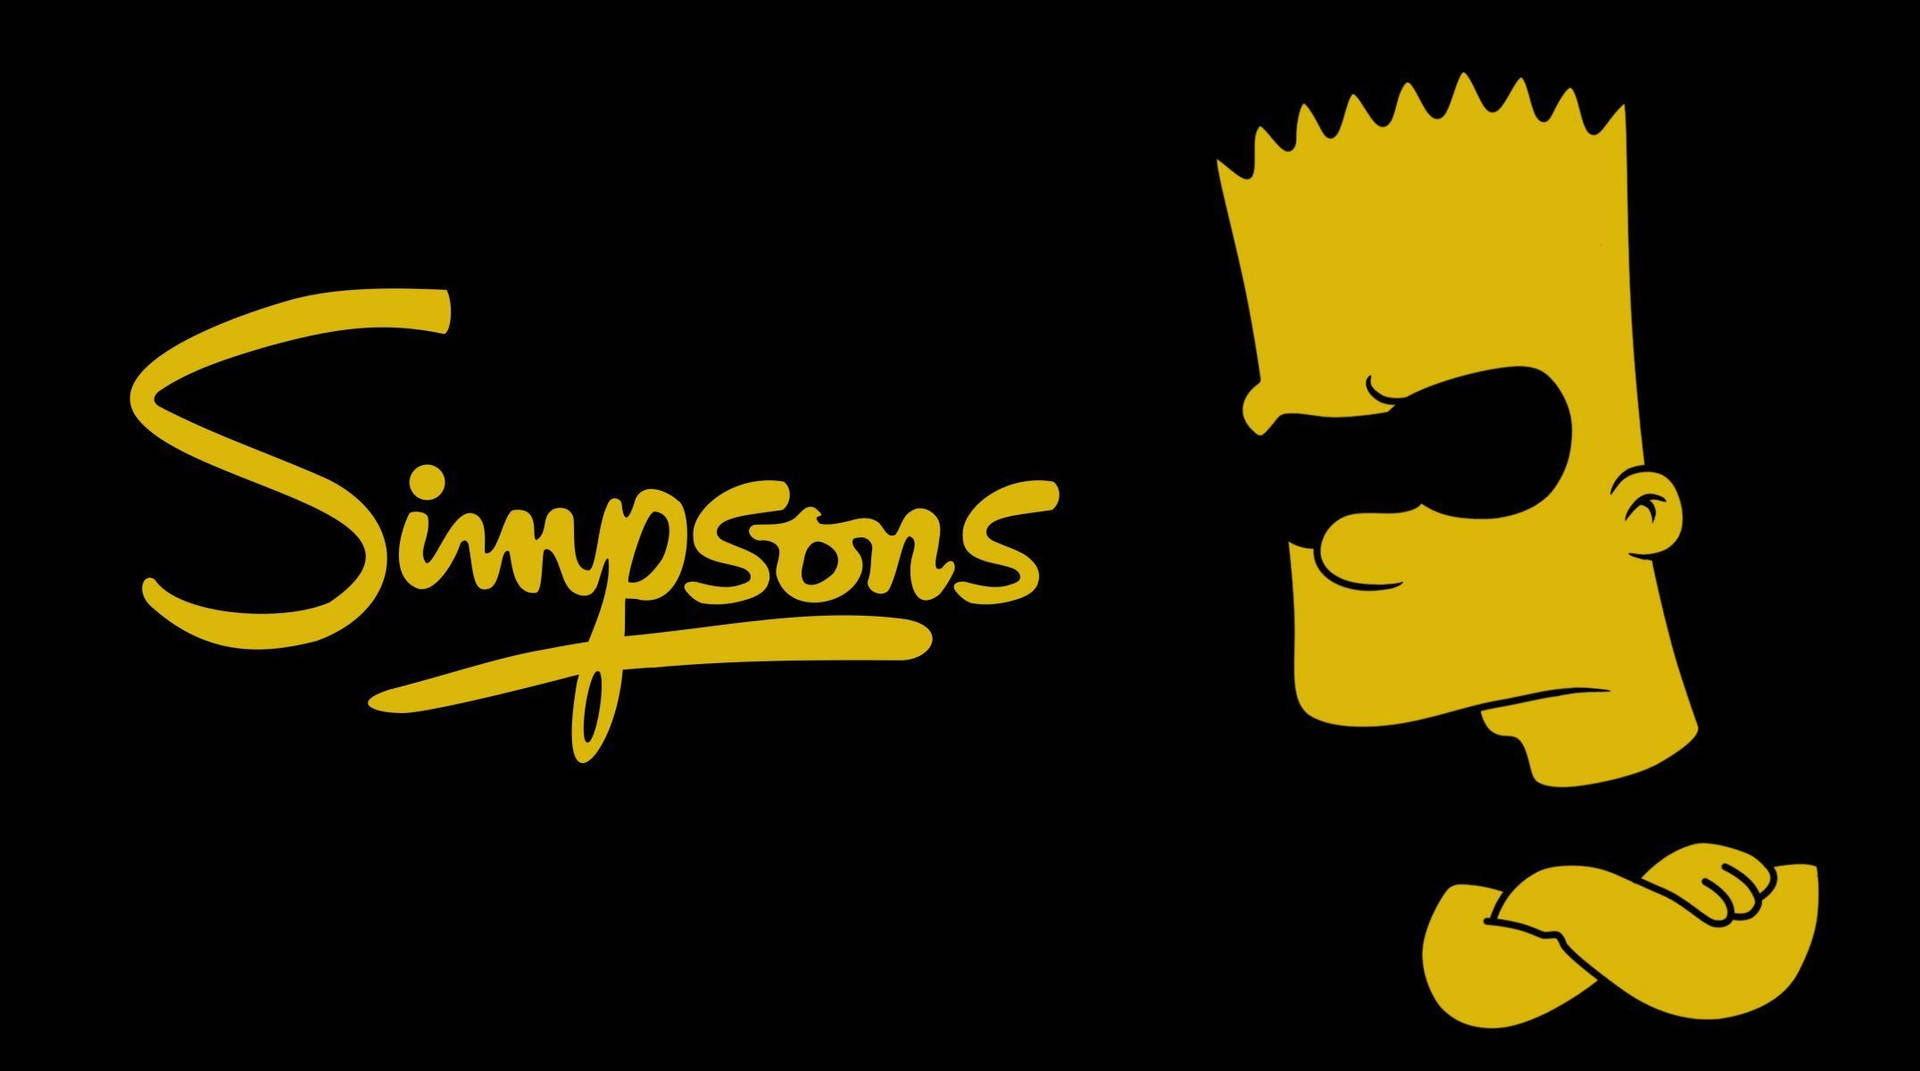 Cool Bart Simpson With Black Eyes Wallpaper